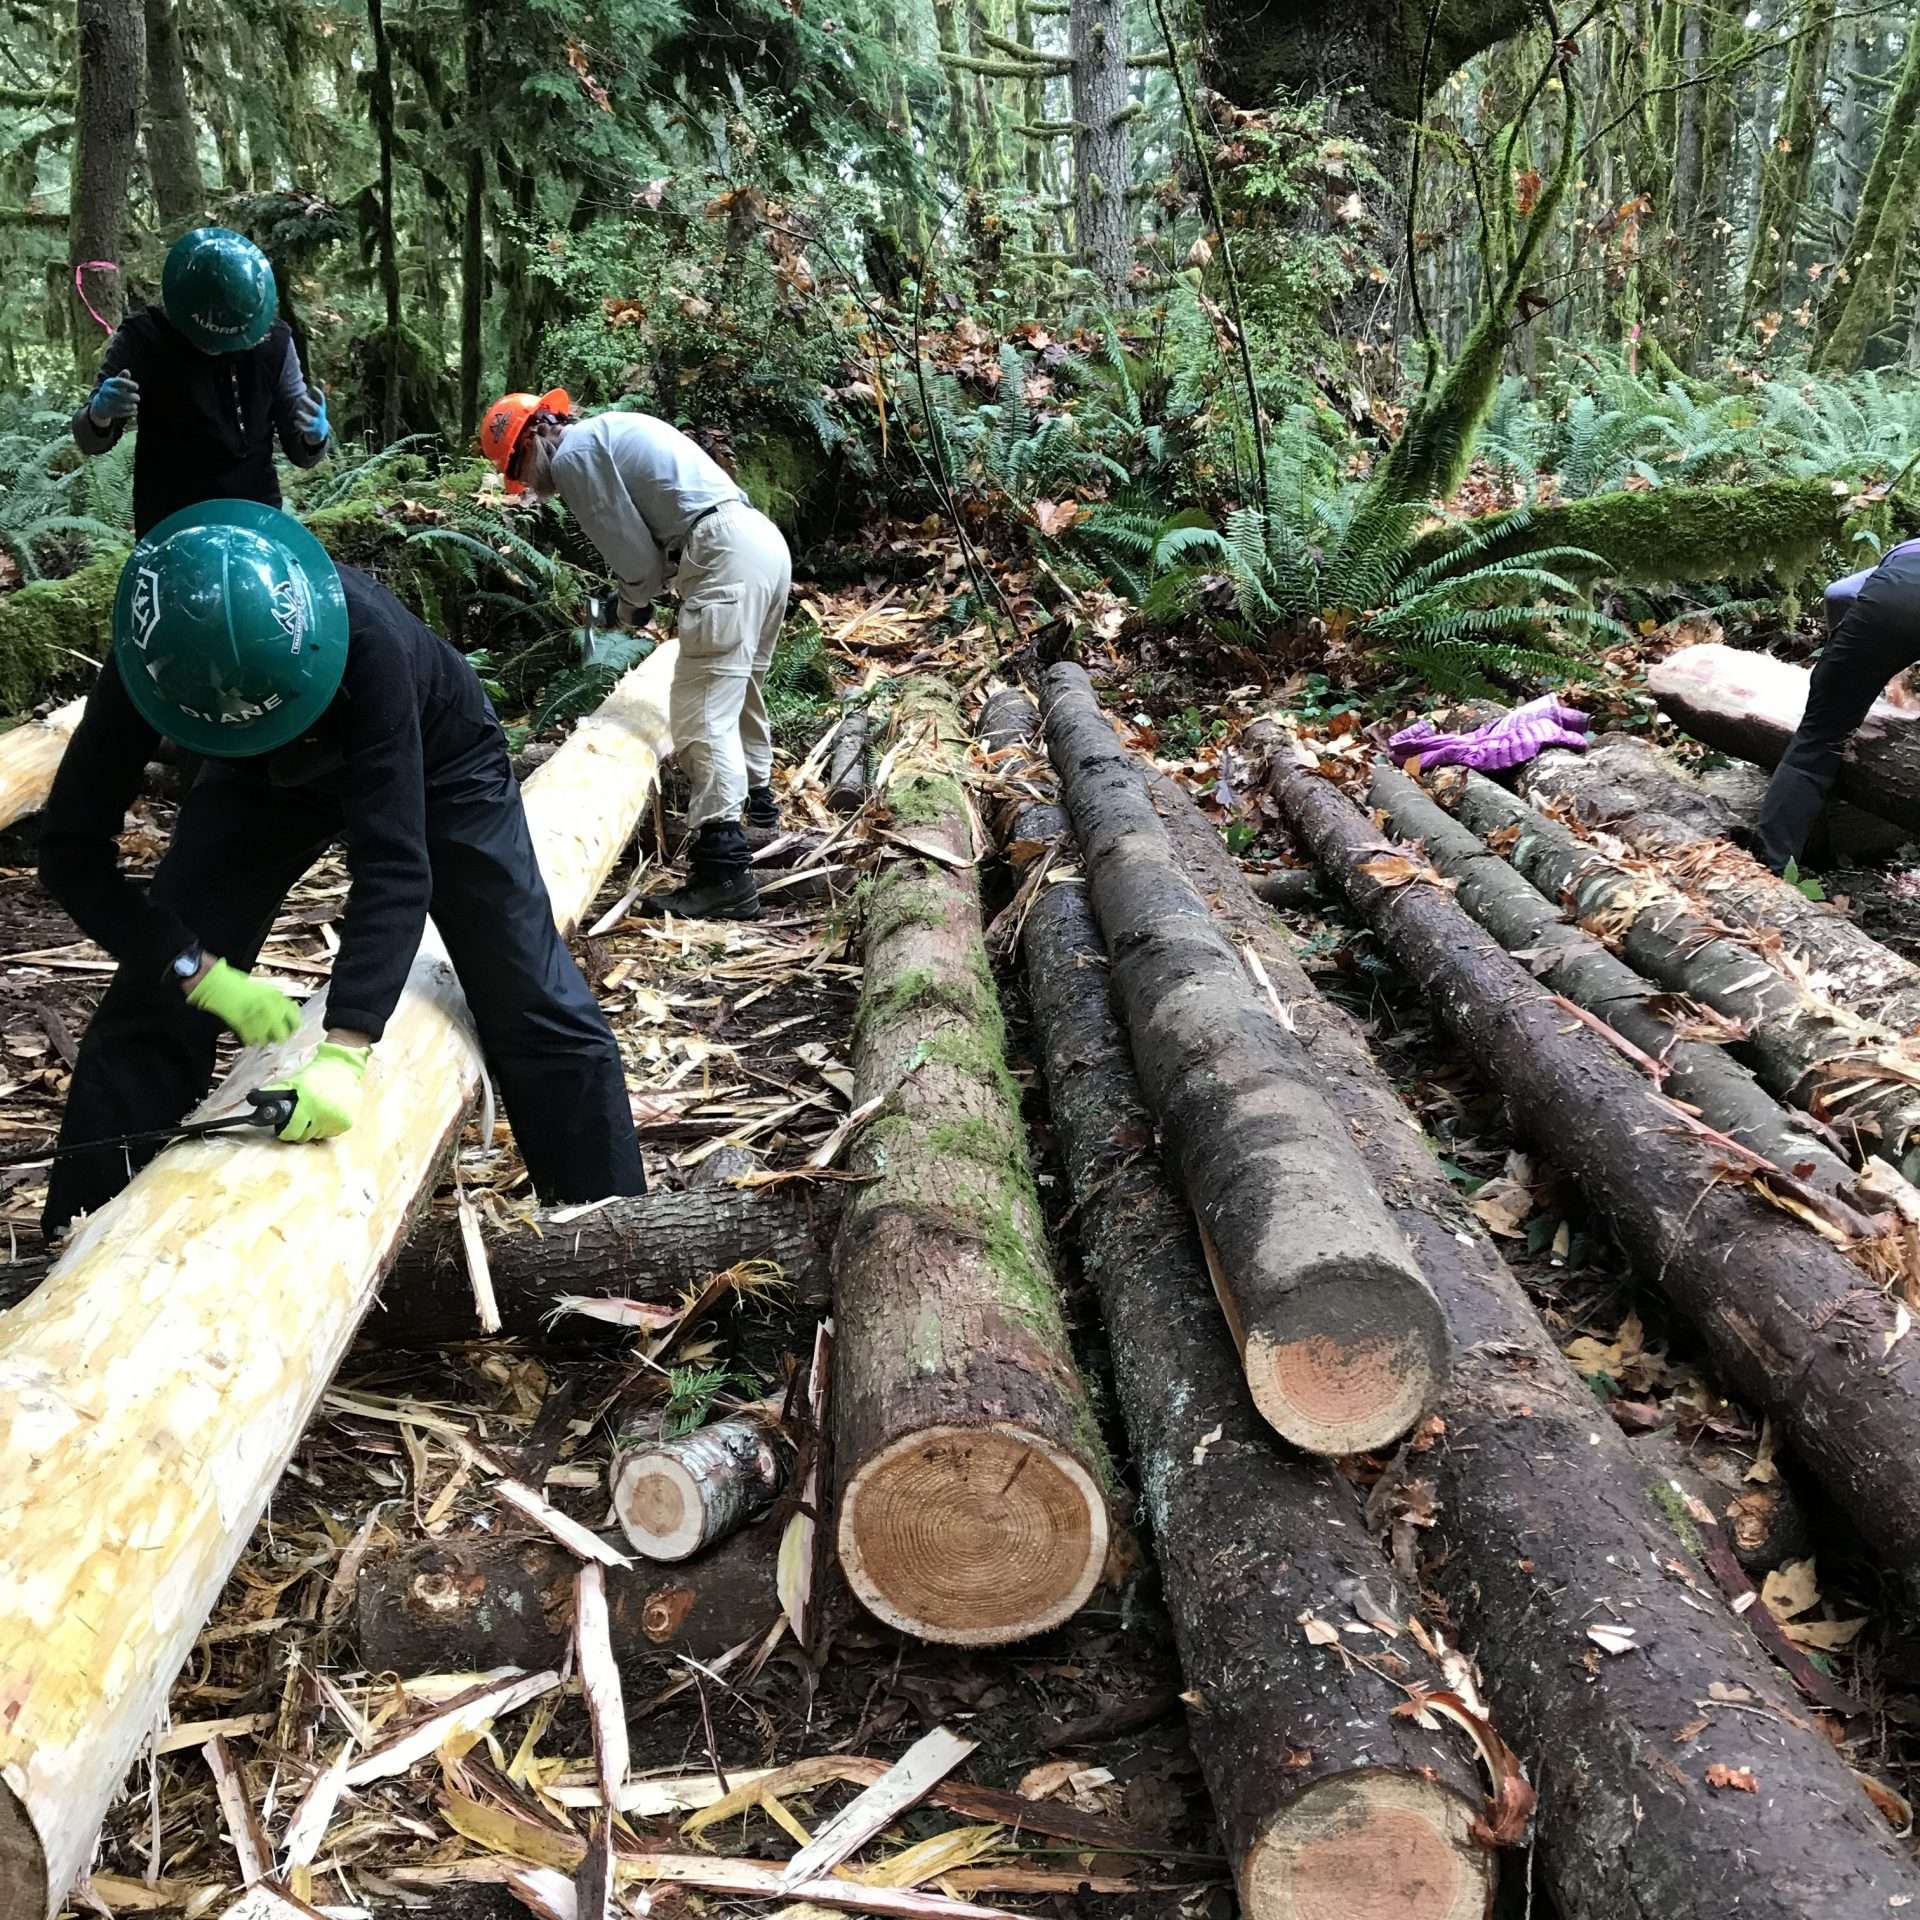 Three men wearing hardhats with tools in hand, bending over logs.